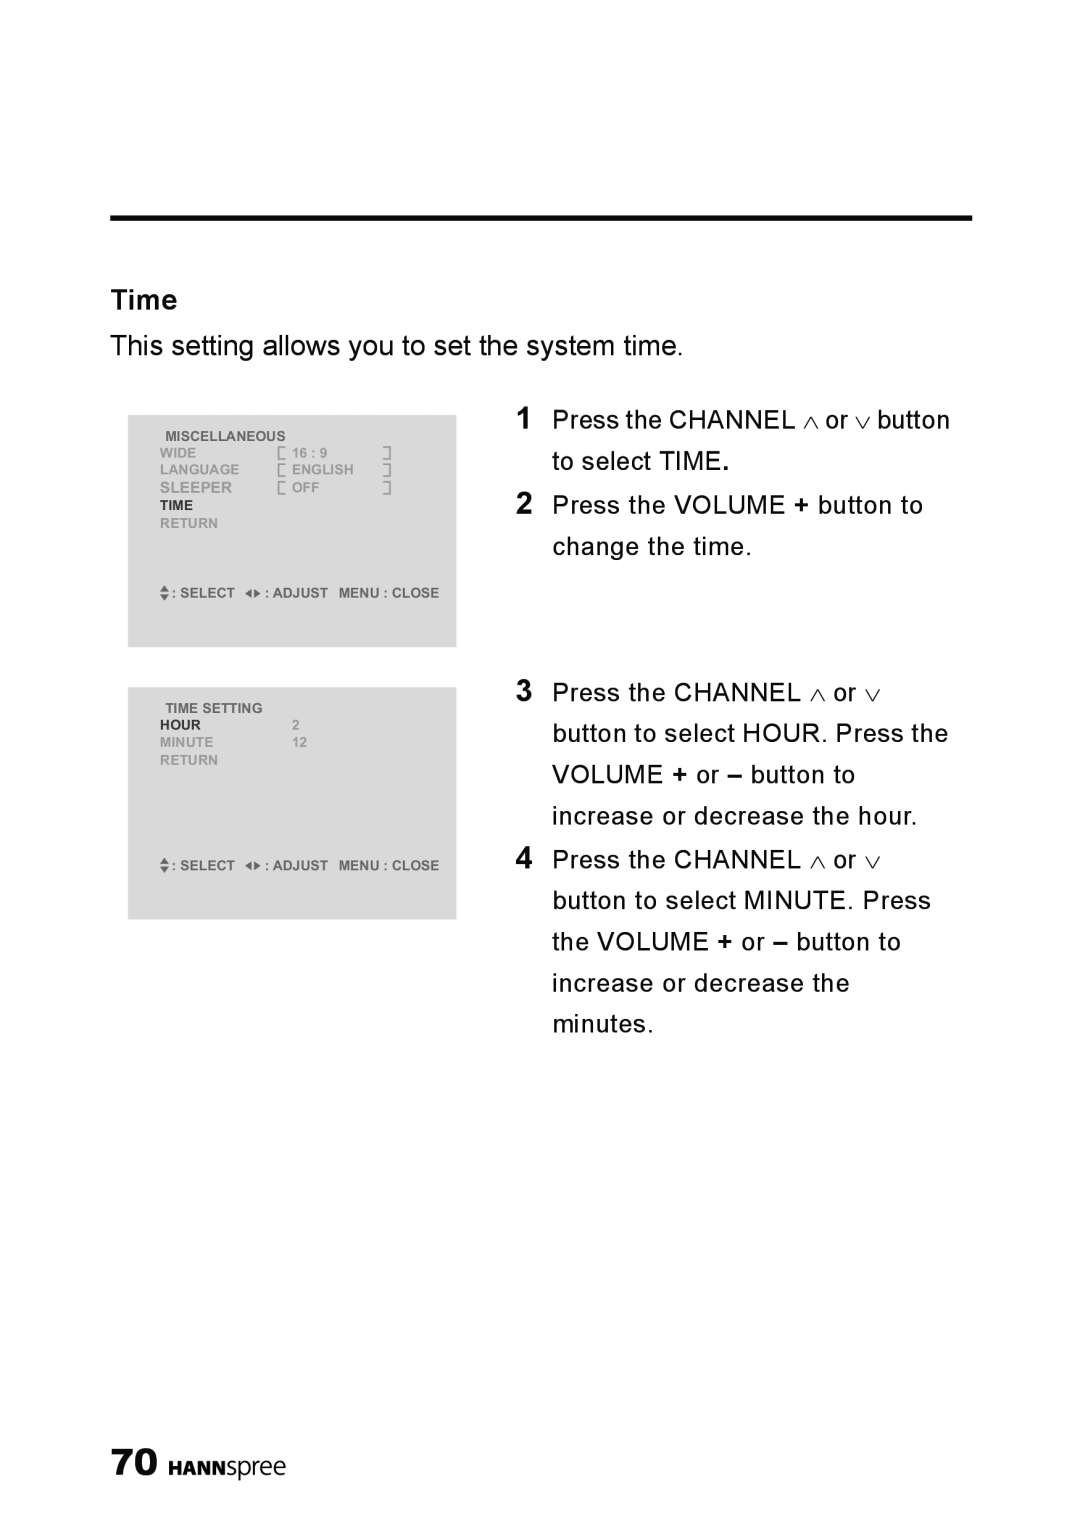 HANNspree LT11-23A1 user manual Time, This setting allows you to set the system time 